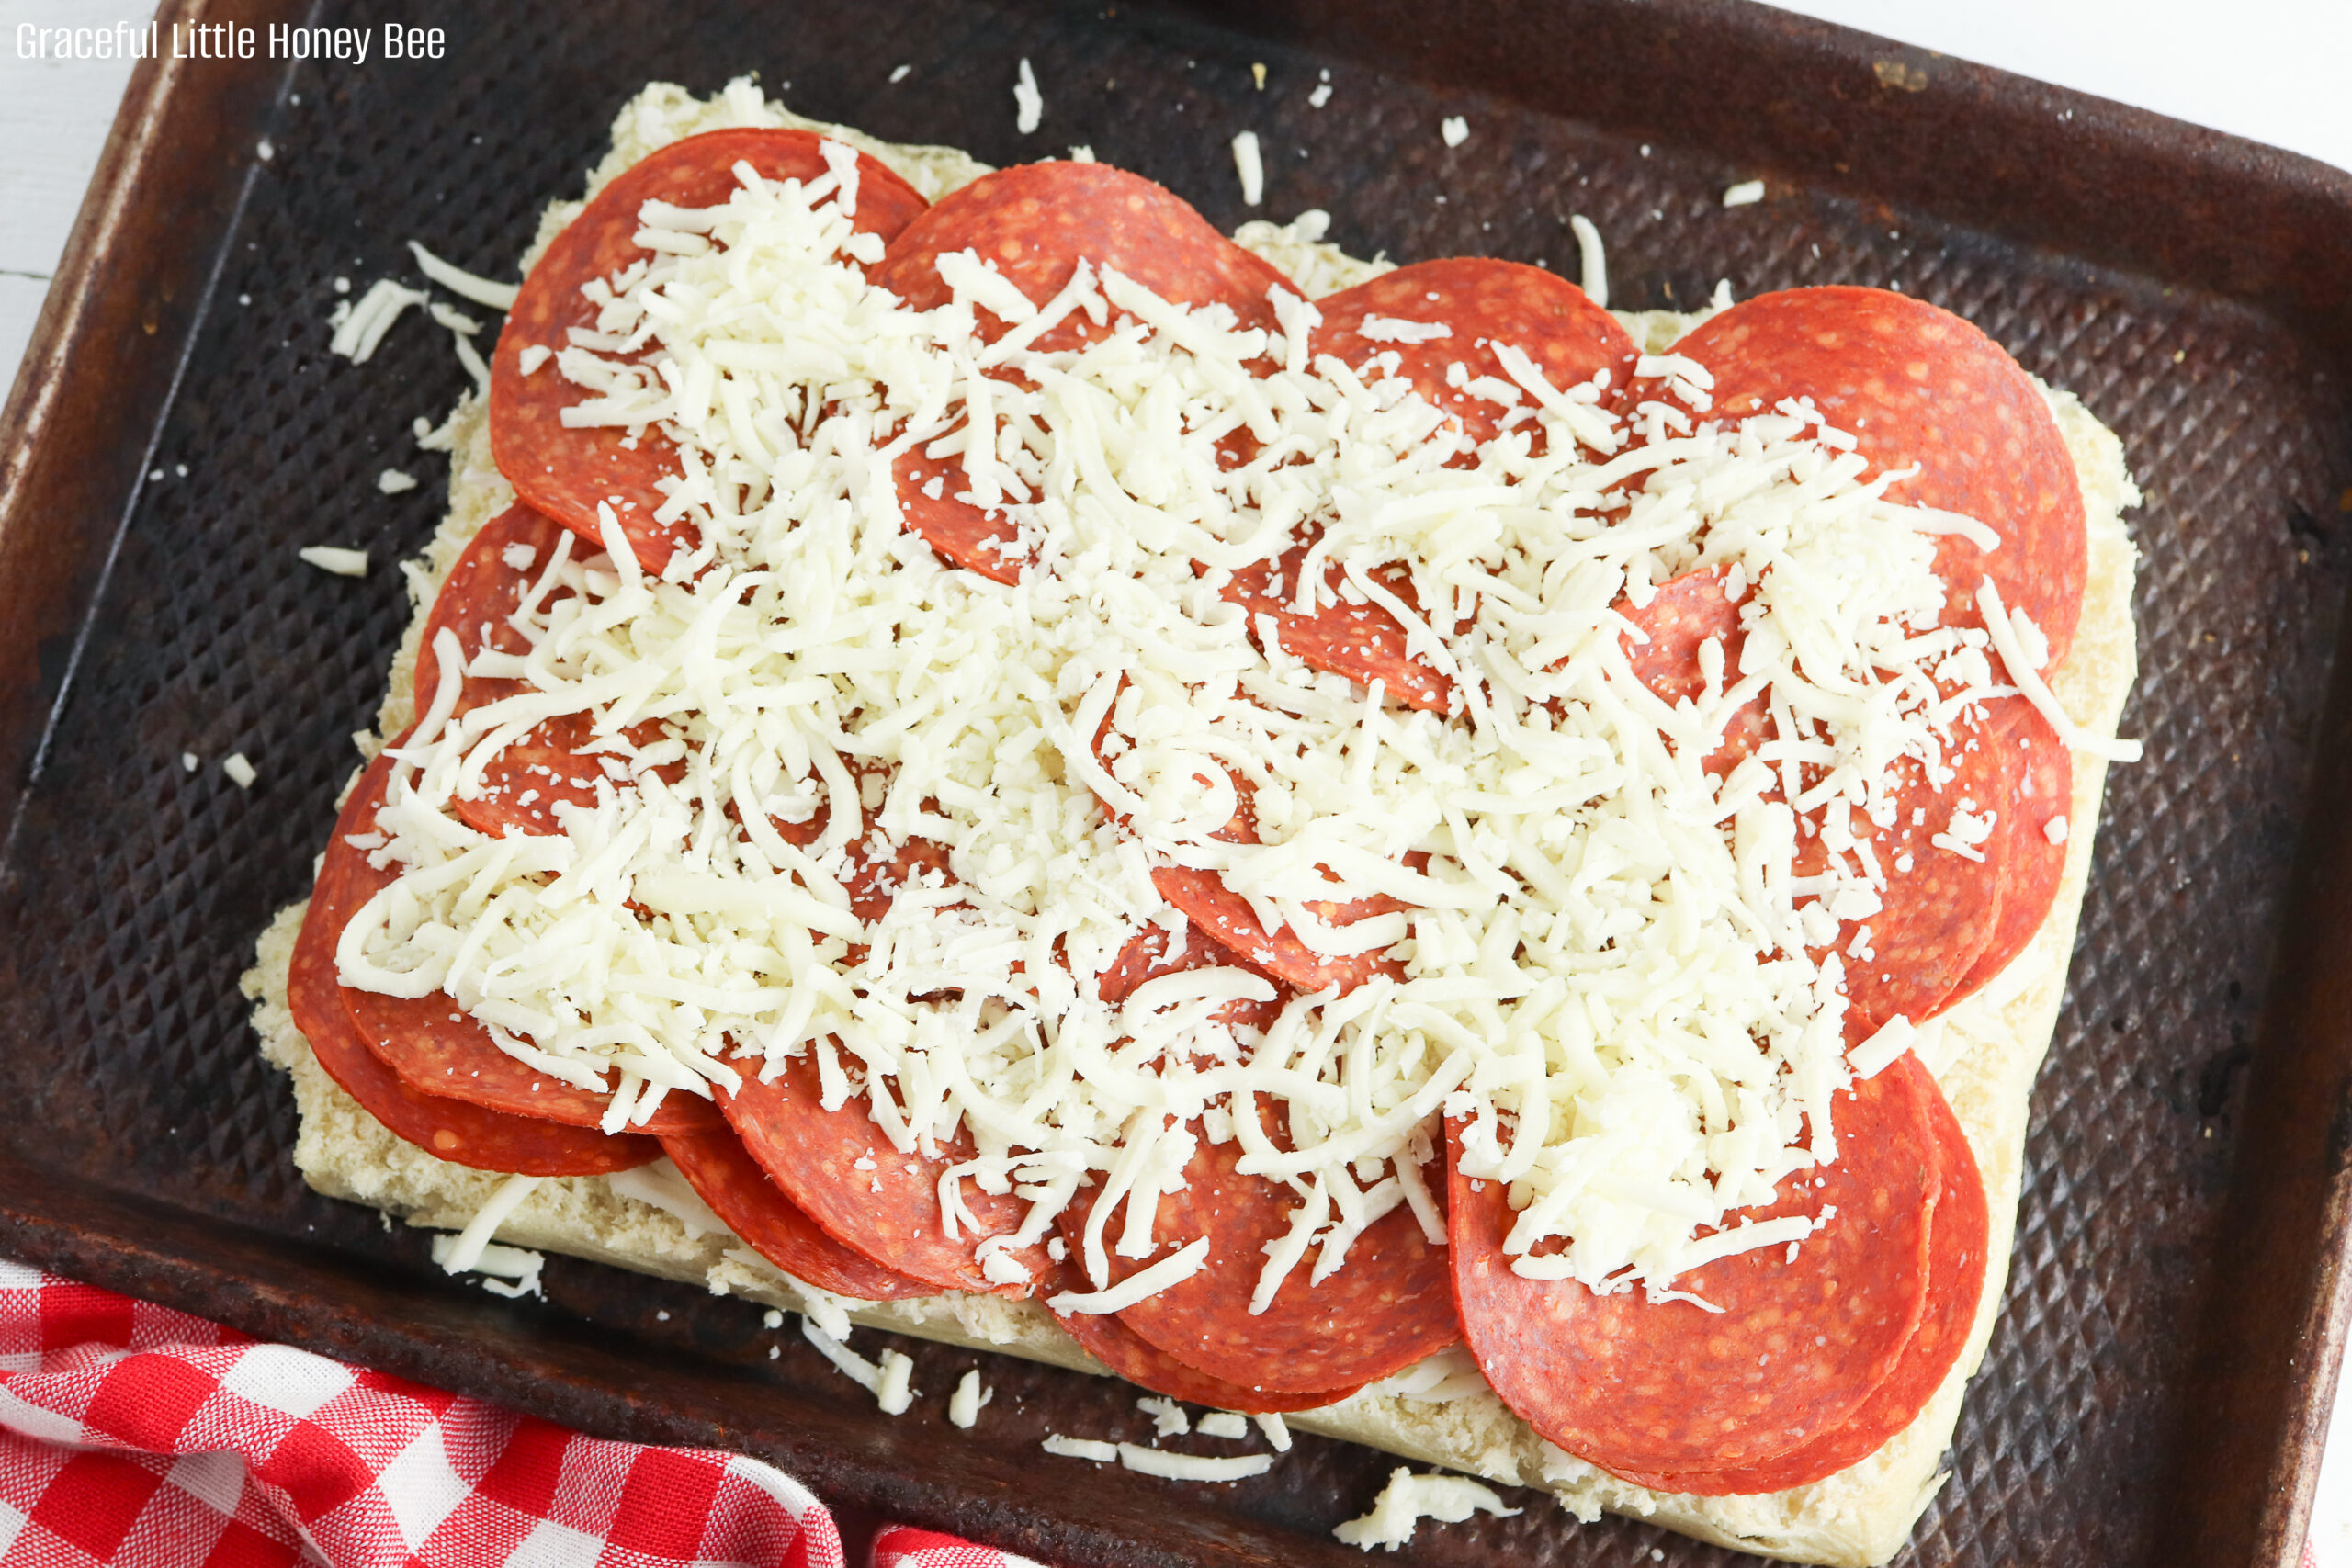 Bottom slab of rolls sitting on a baking sheet sprinkled with mozzarella cheese, a layer of pepperoni slices and topped with more mozzarella cheese.